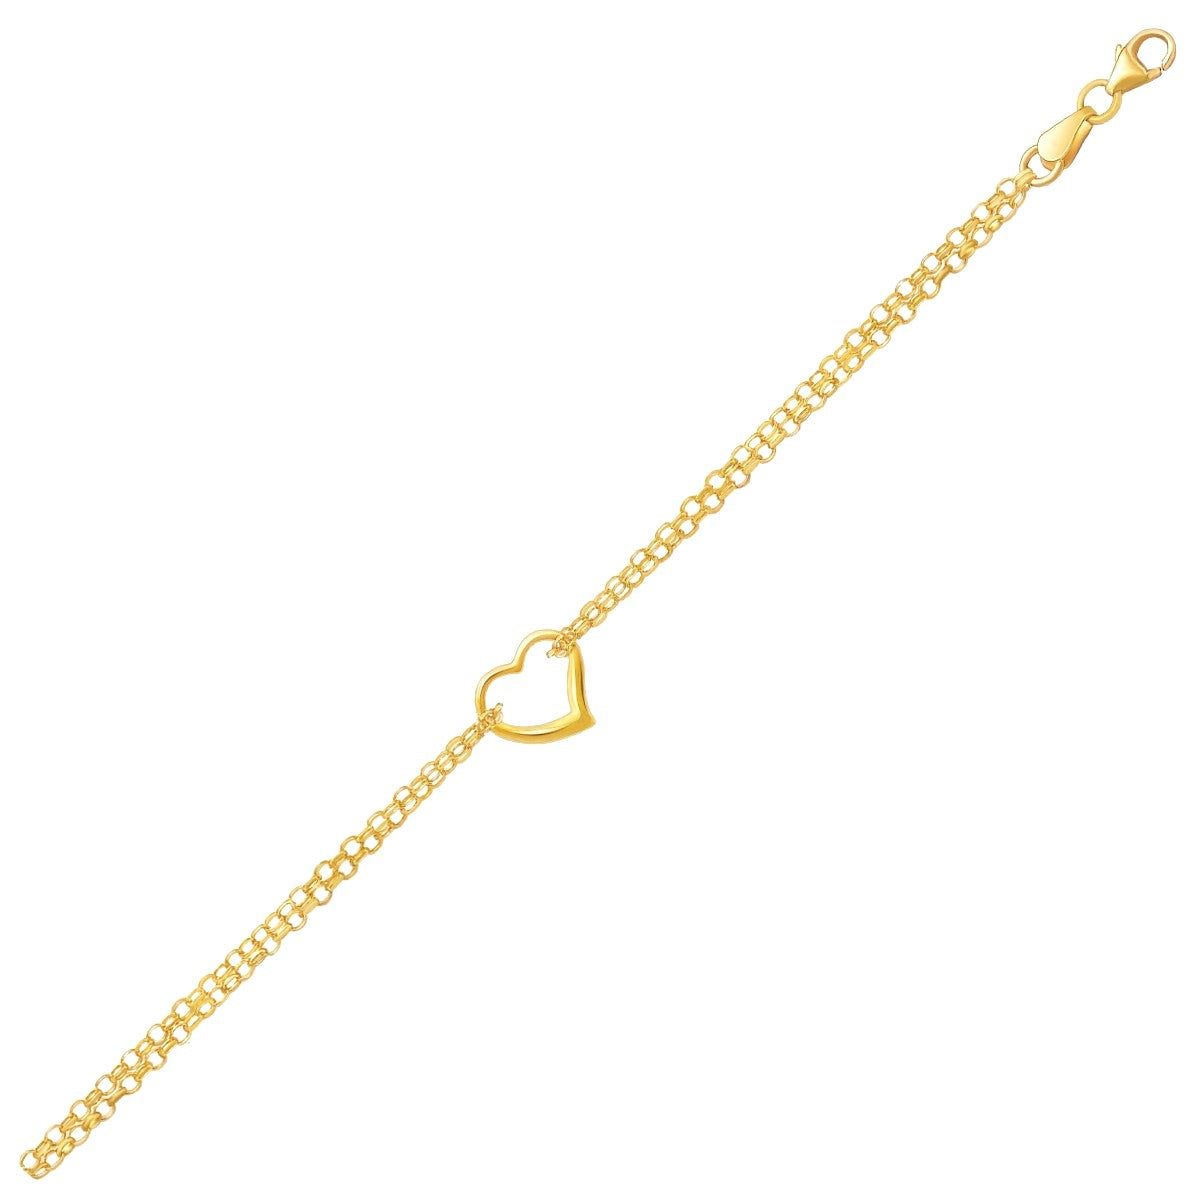 14k Yellow Gold Double Rolo Chain Anklet with an Open Heart Station